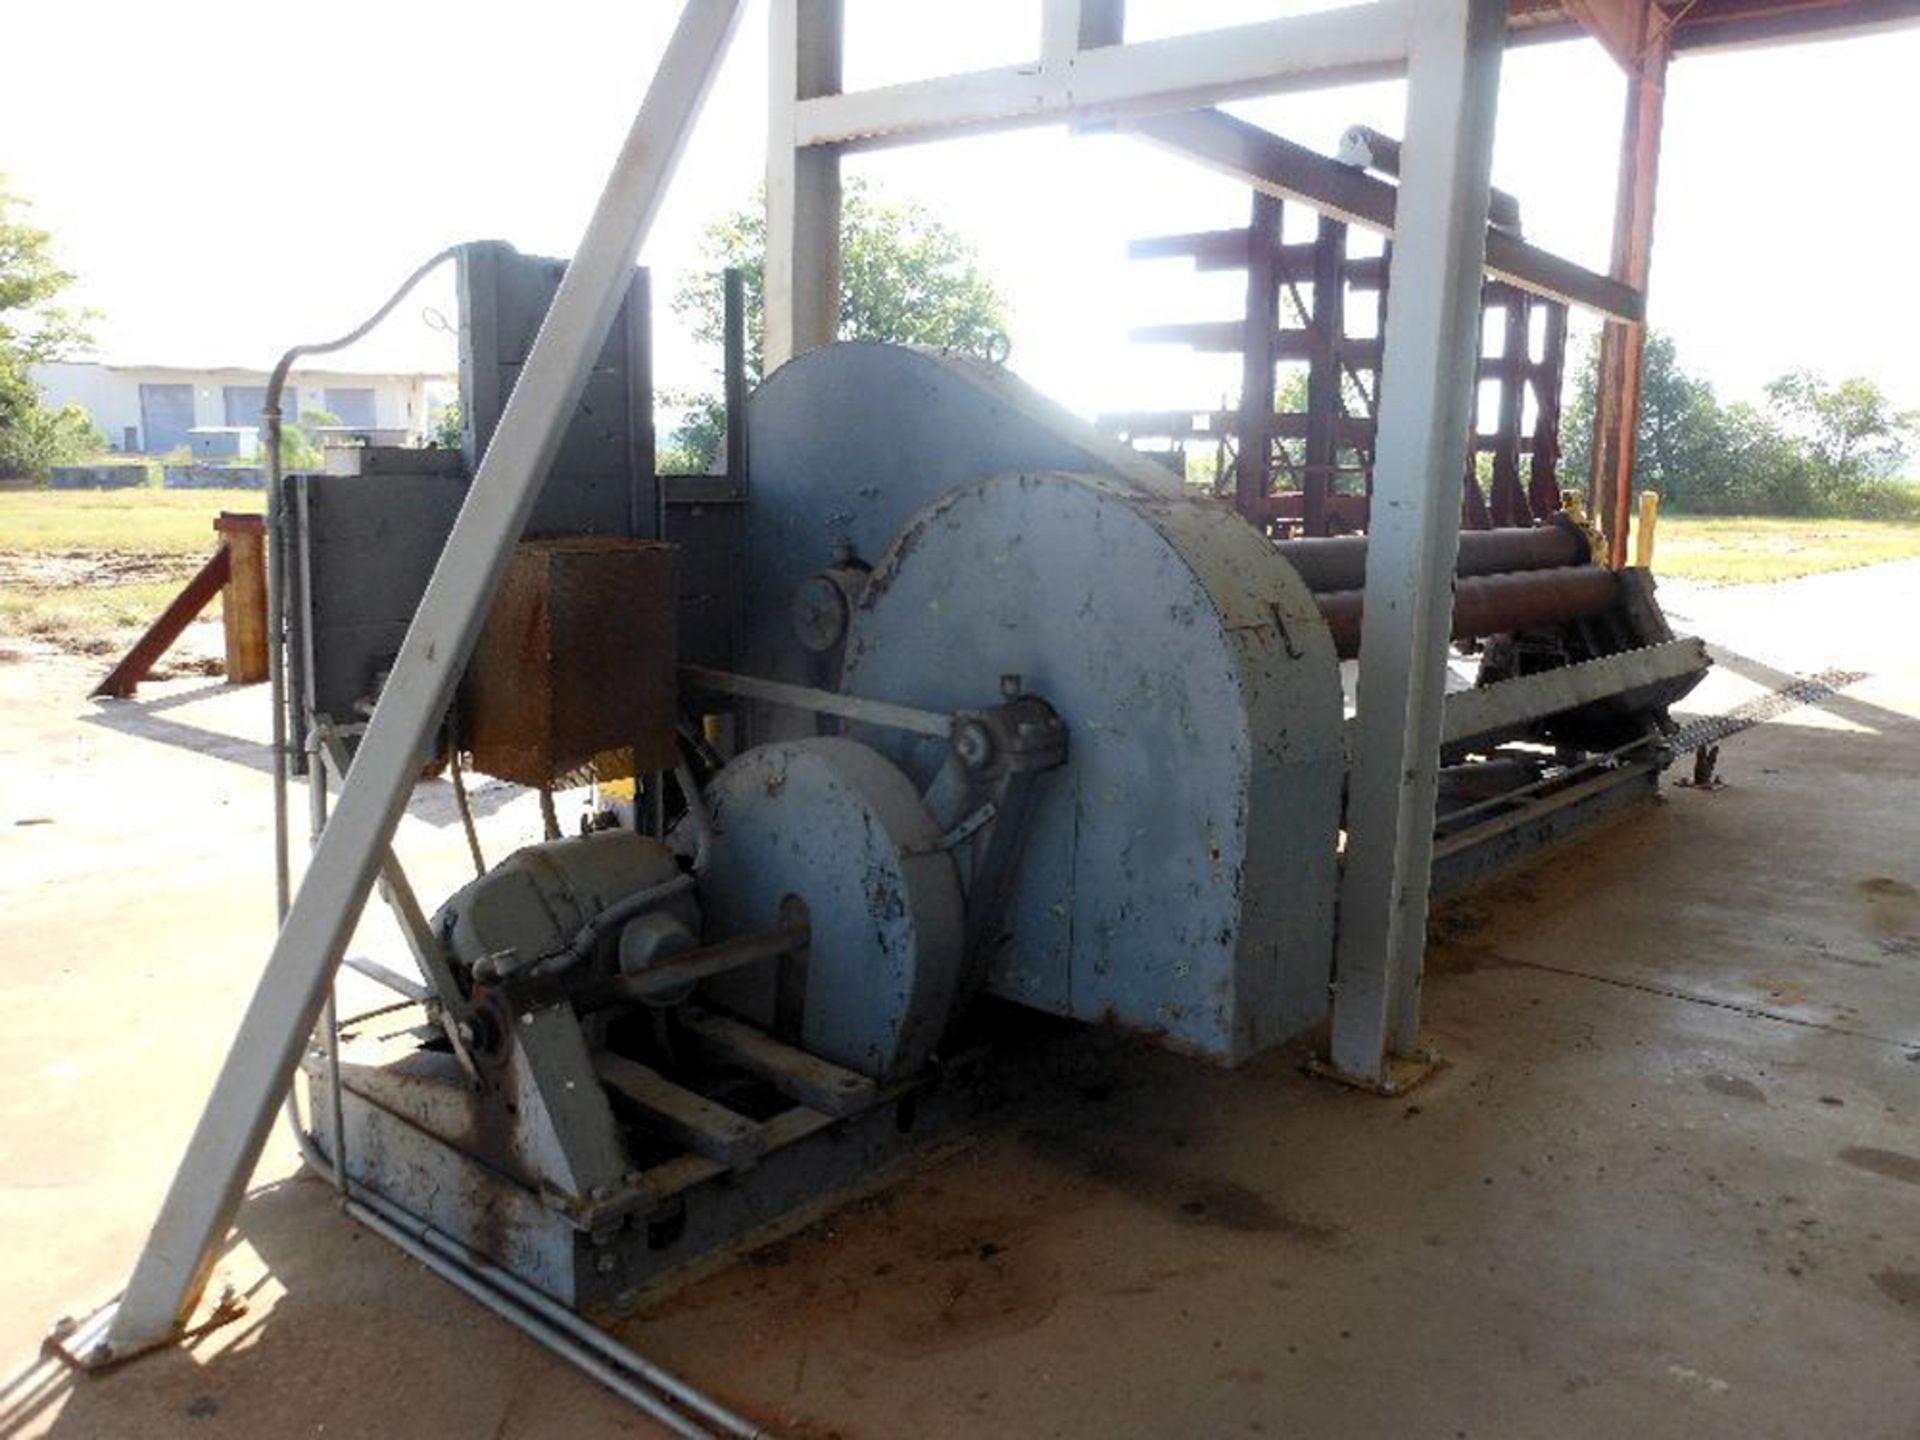 Bertsch Initial Pinch Power Roll, 3/16" x 12', Mdl: #7, S/N: 395-02 (6471P) (Located In Painesville,